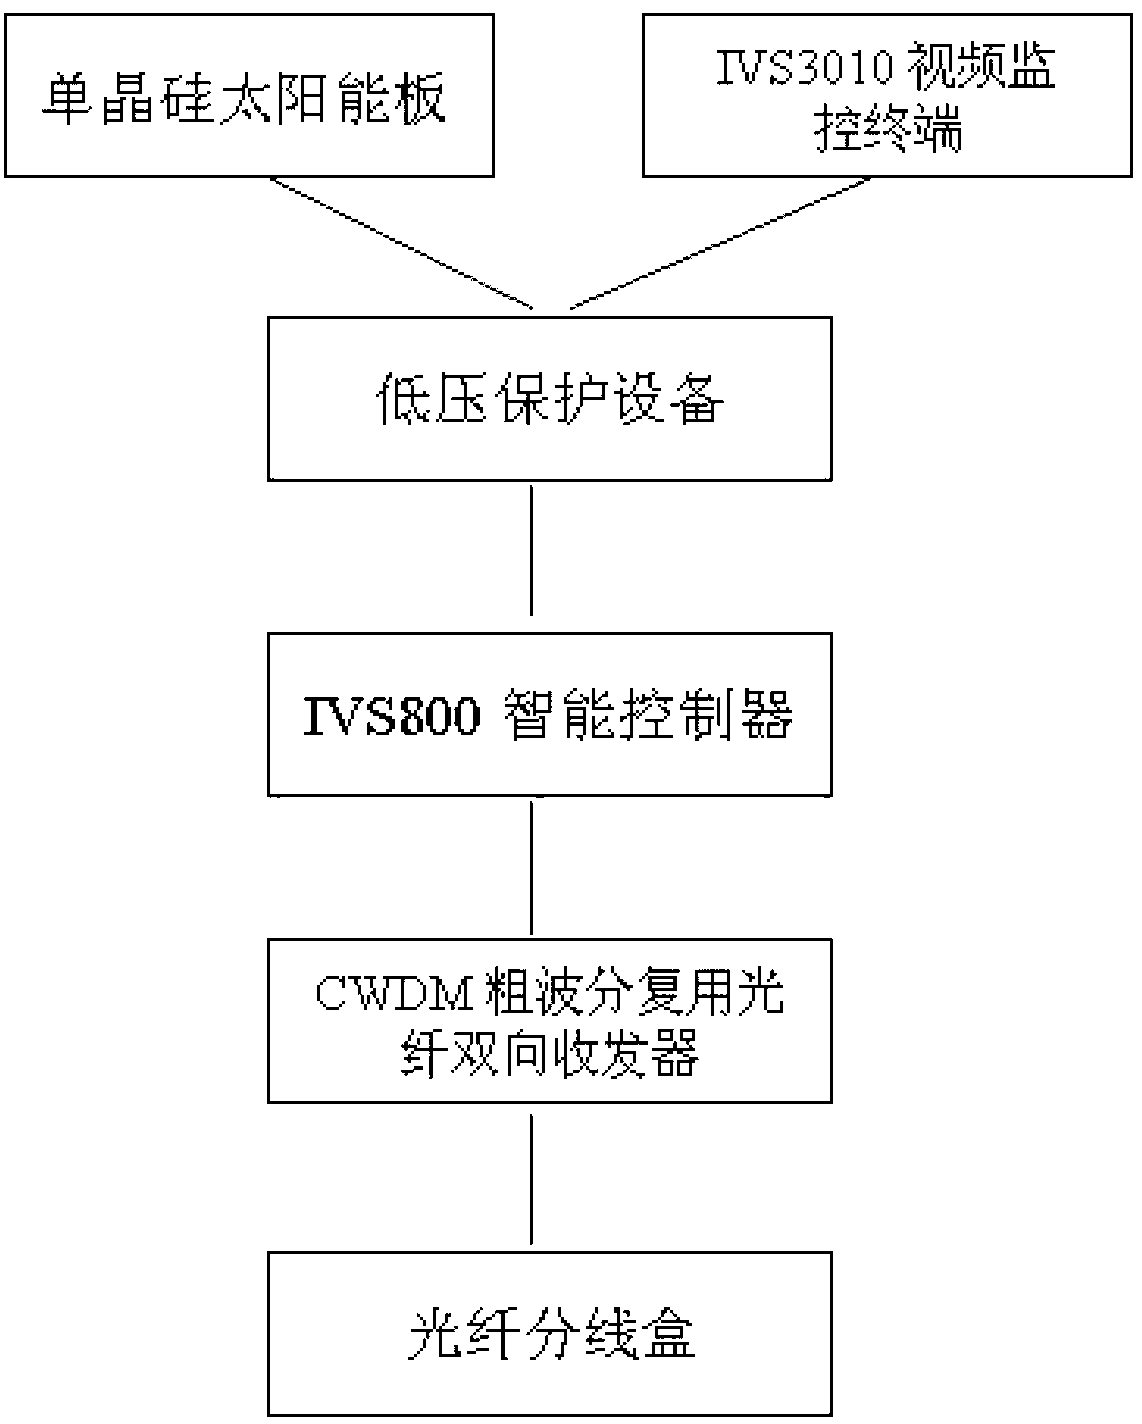 Electric transmission line real-time video condition monitoring system based on wireless communication